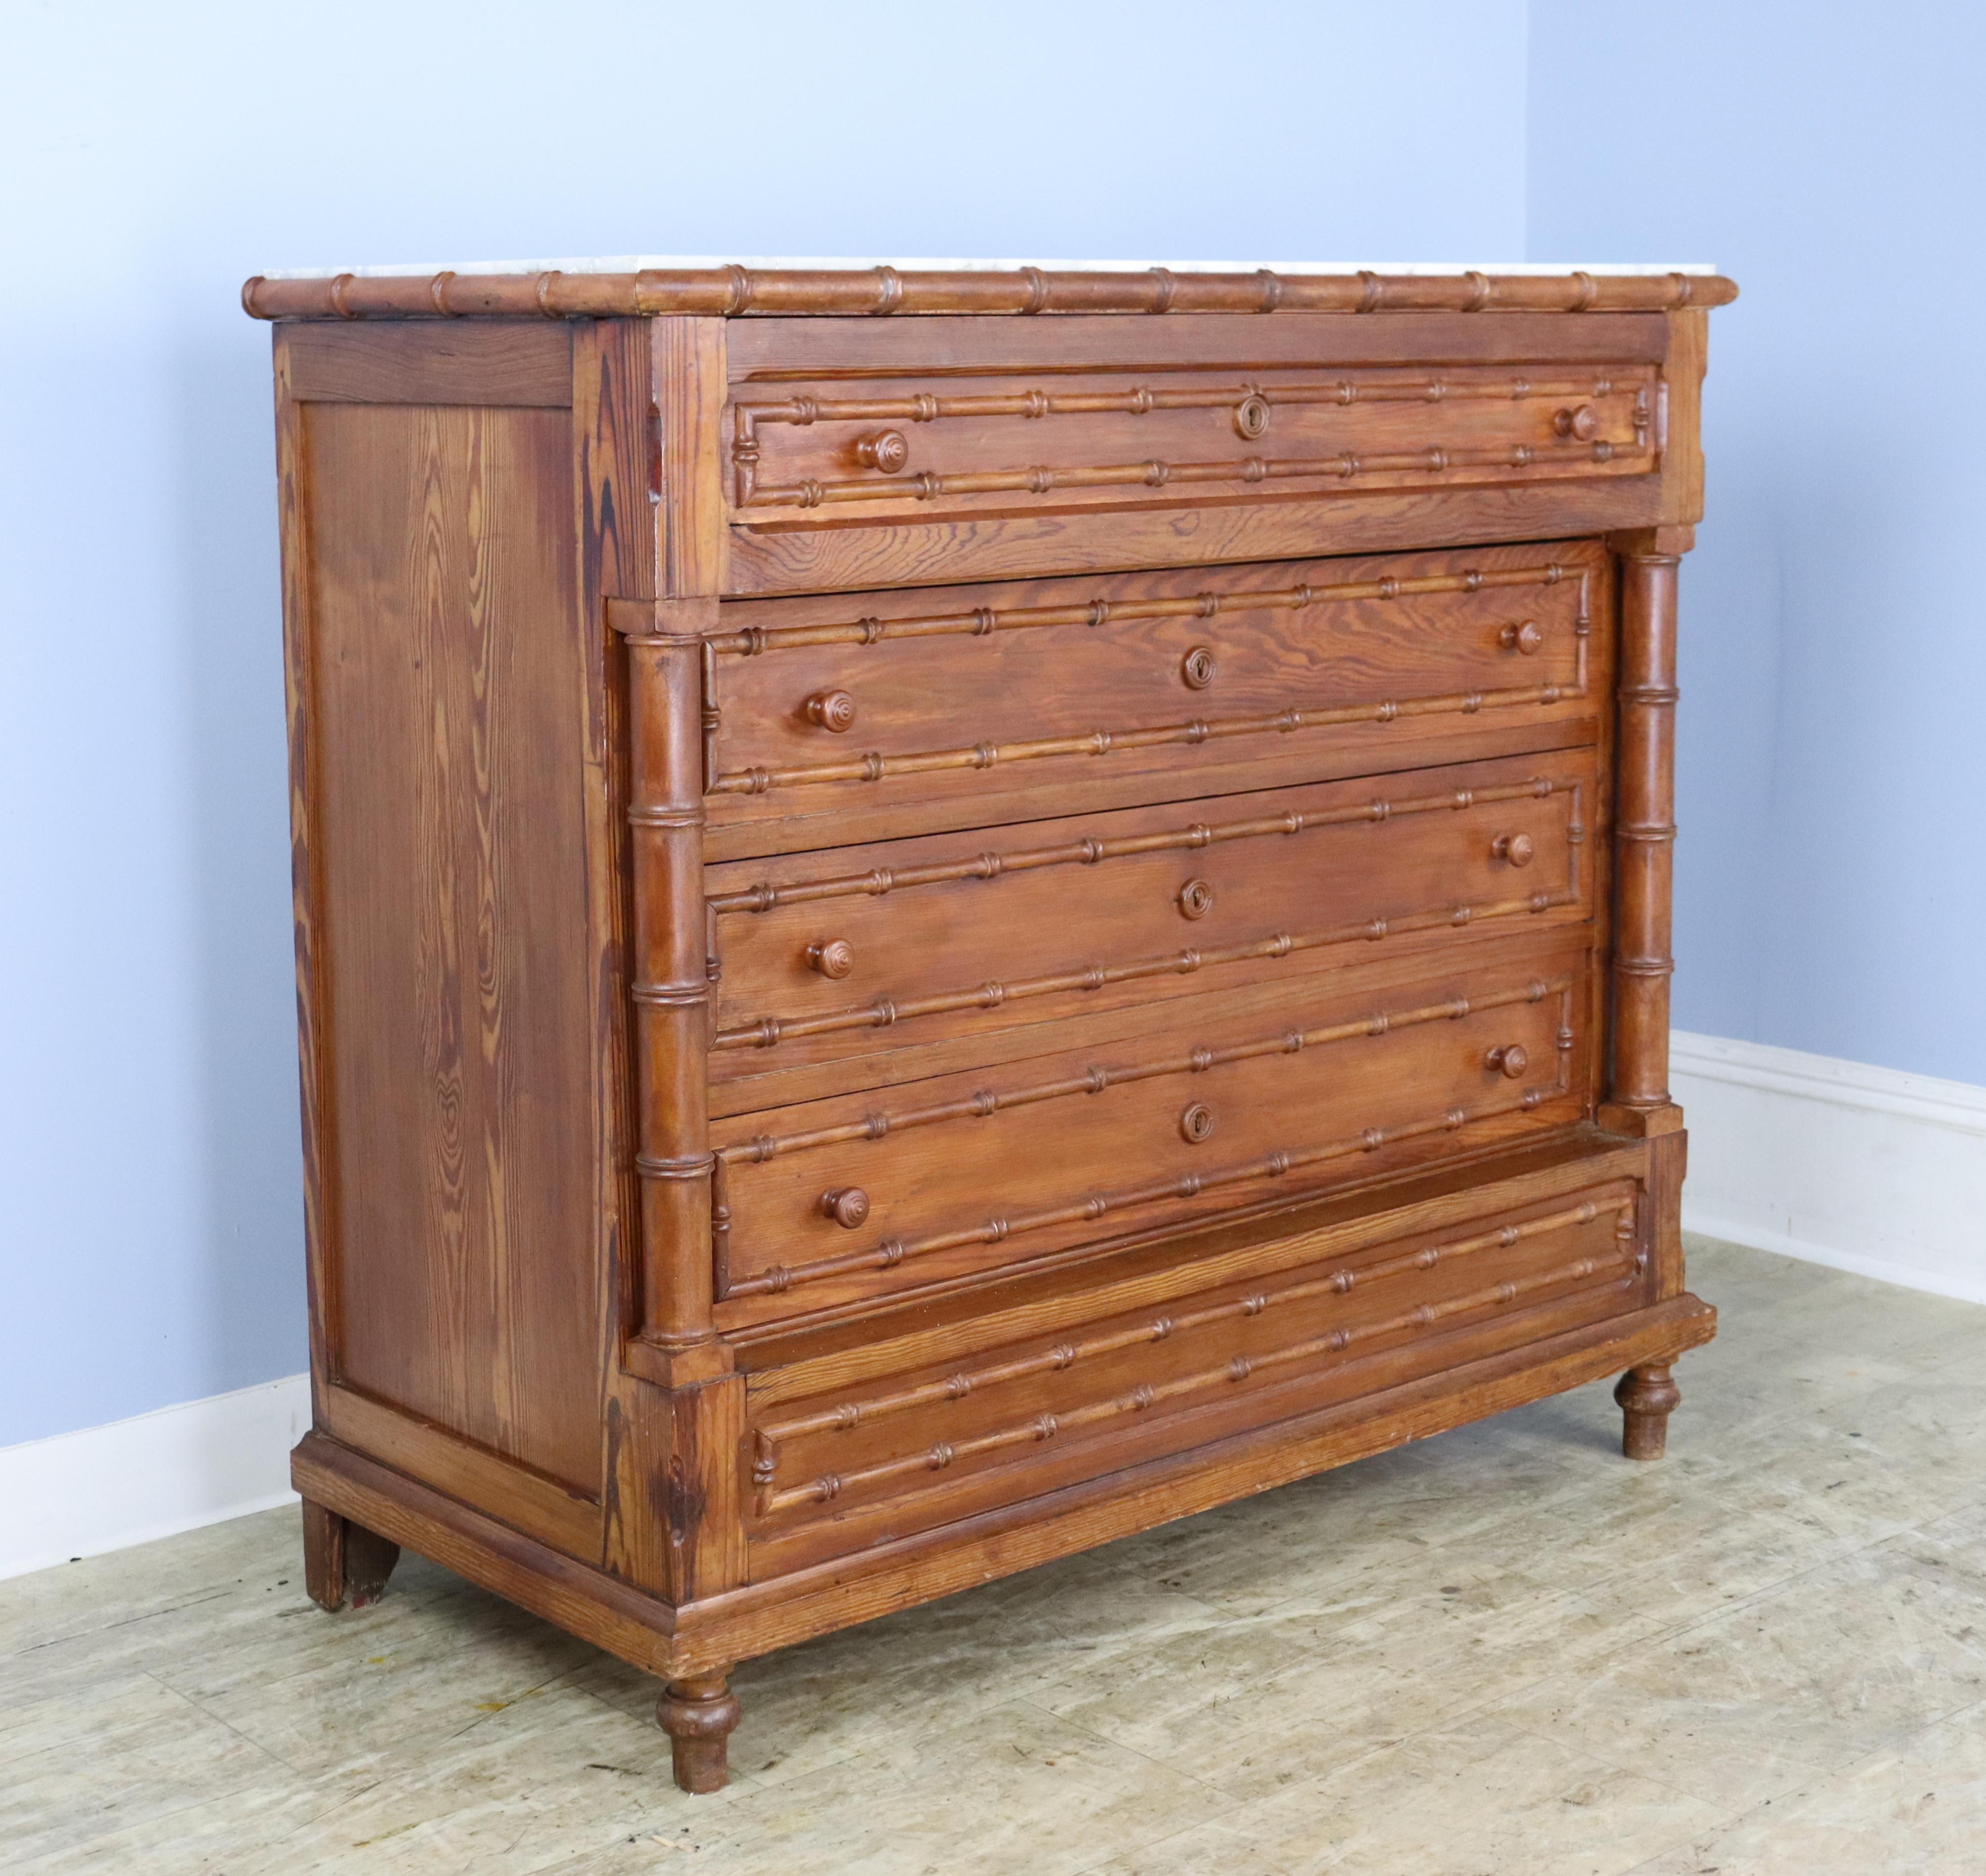 A very good looking antique faux bamboo chest of drawers with lots of bamboo trim and mouldings.  Also notable are the columns on either side which add another level of interest.  Marble is in good condition, with some areas of wear and